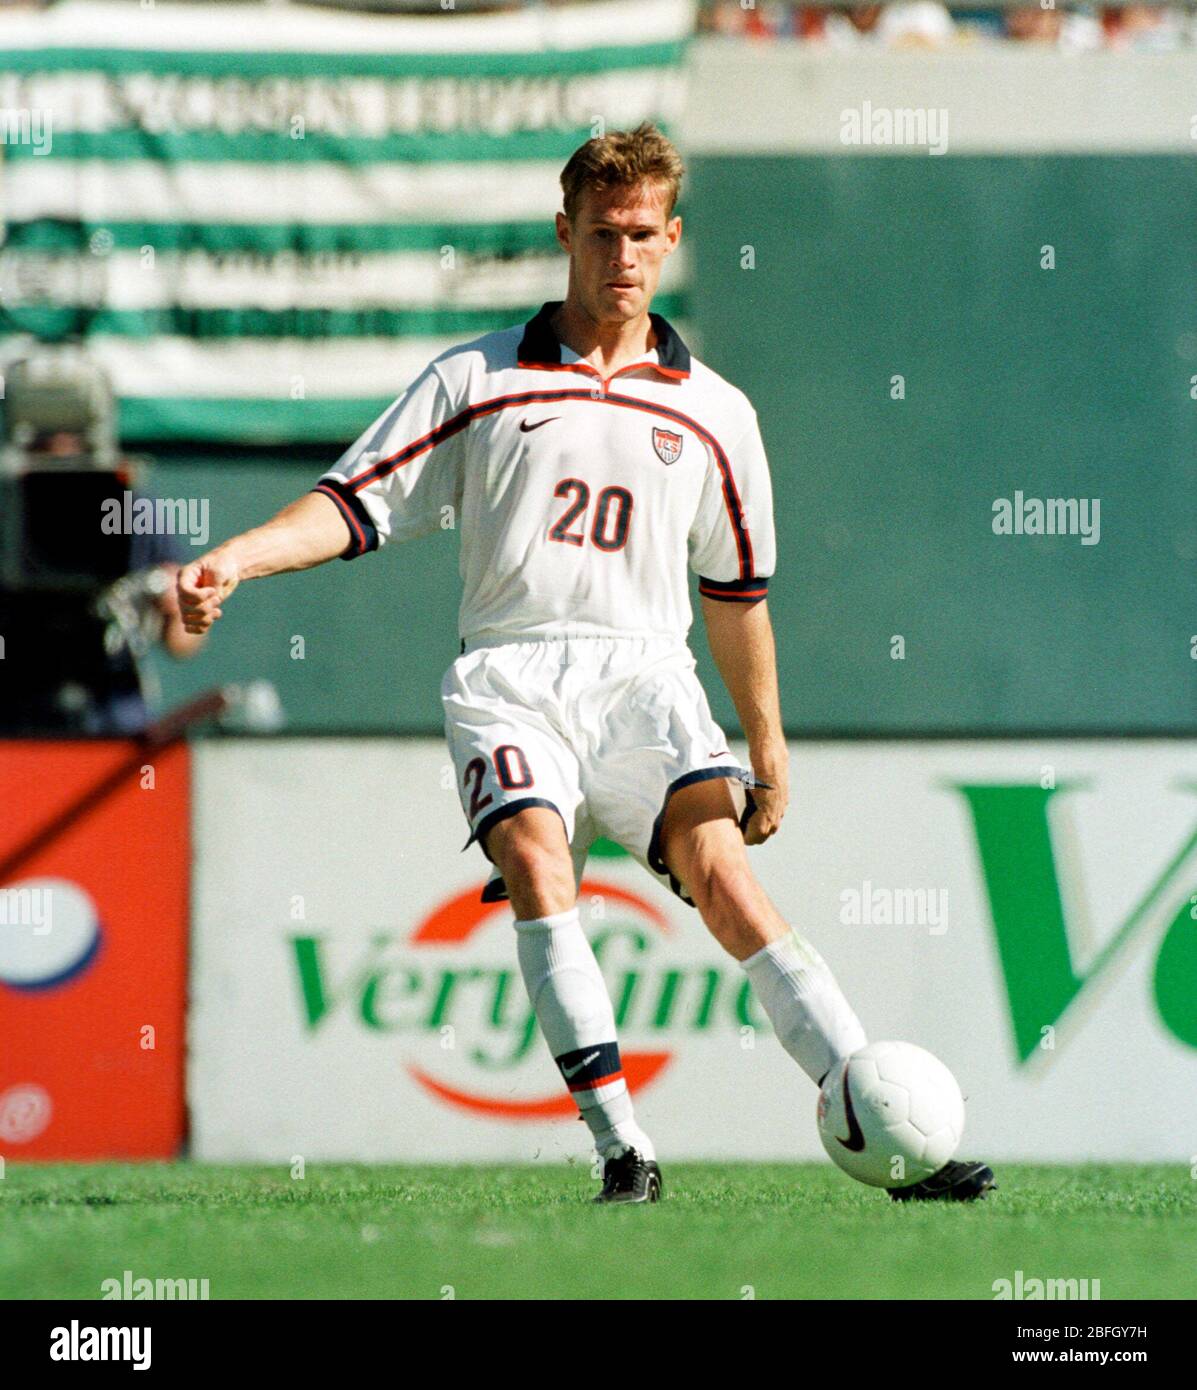 Brian McBride of the Columbus Crew walks down the field during a game